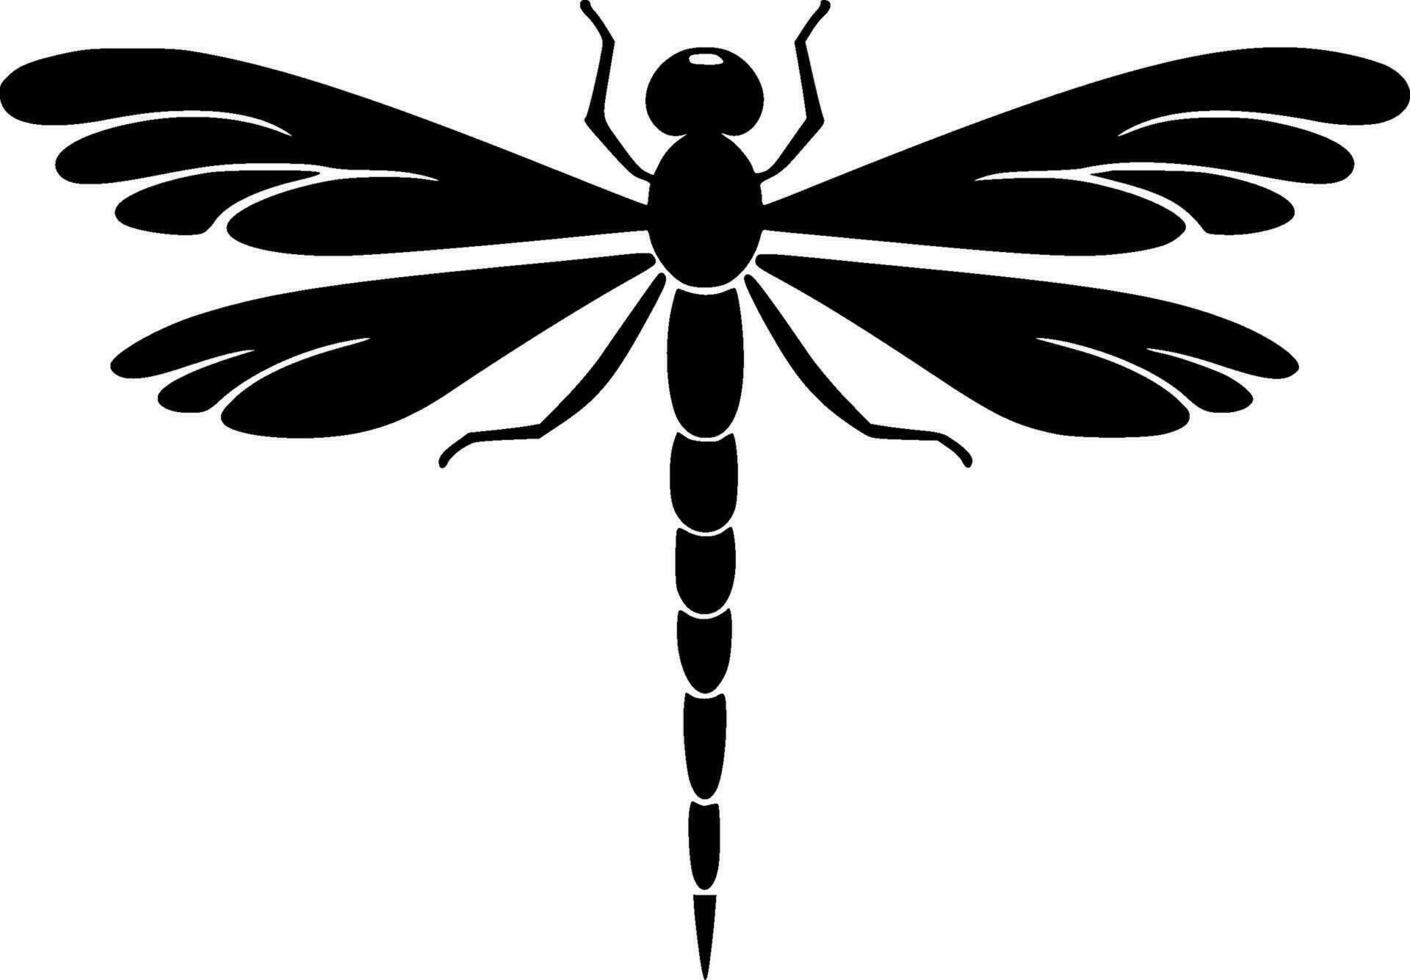 Dragonfly - Black and White Isolated Icon - Vector illustration